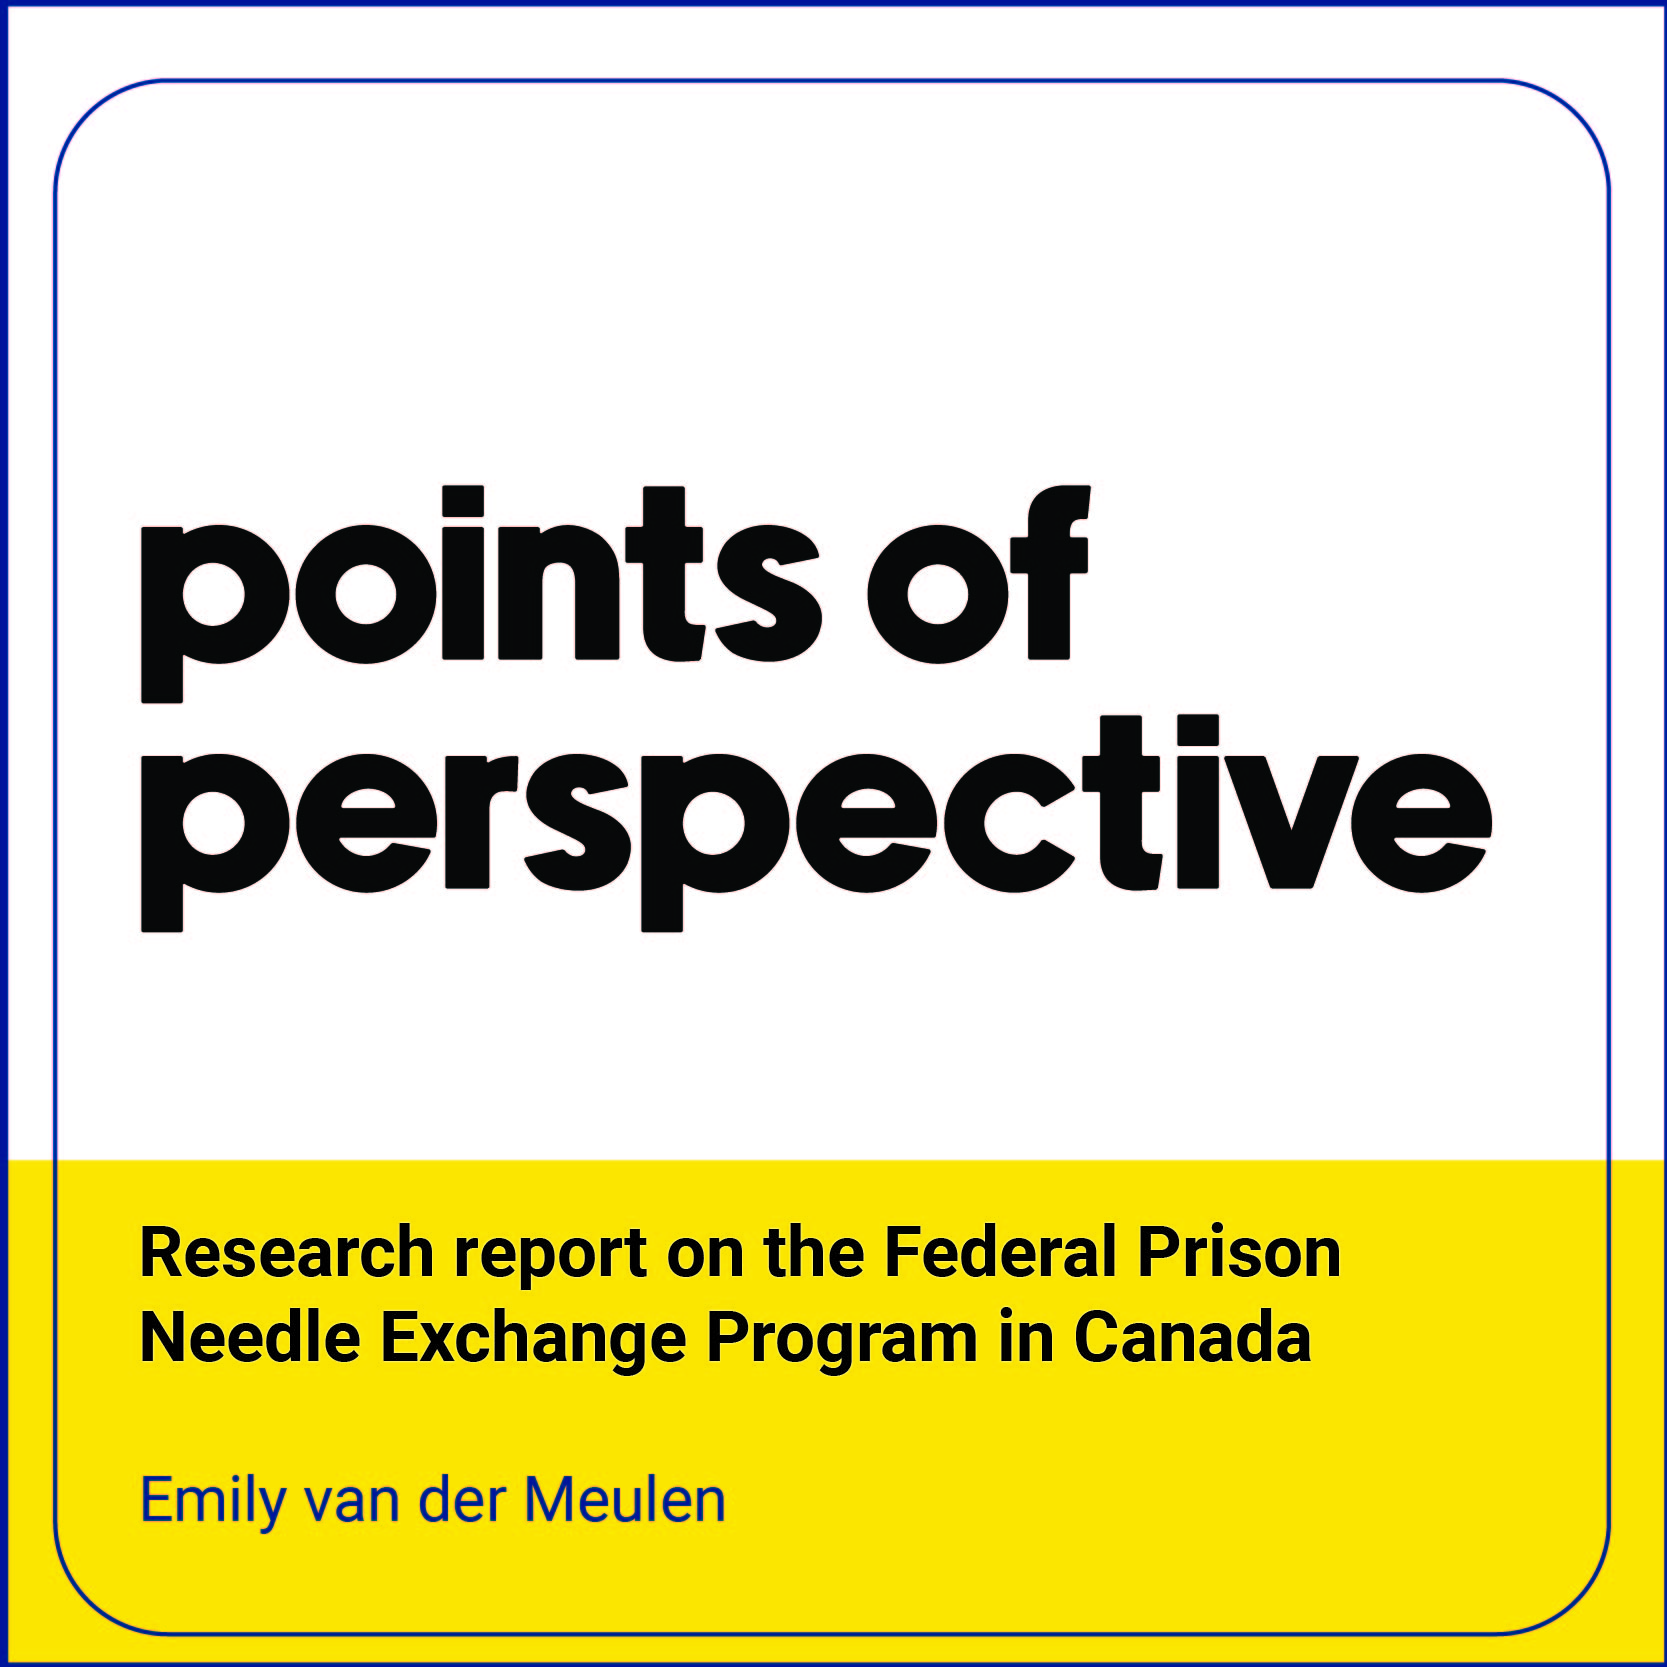 Points of Perspective - Federal Prison Needle Exchange Program